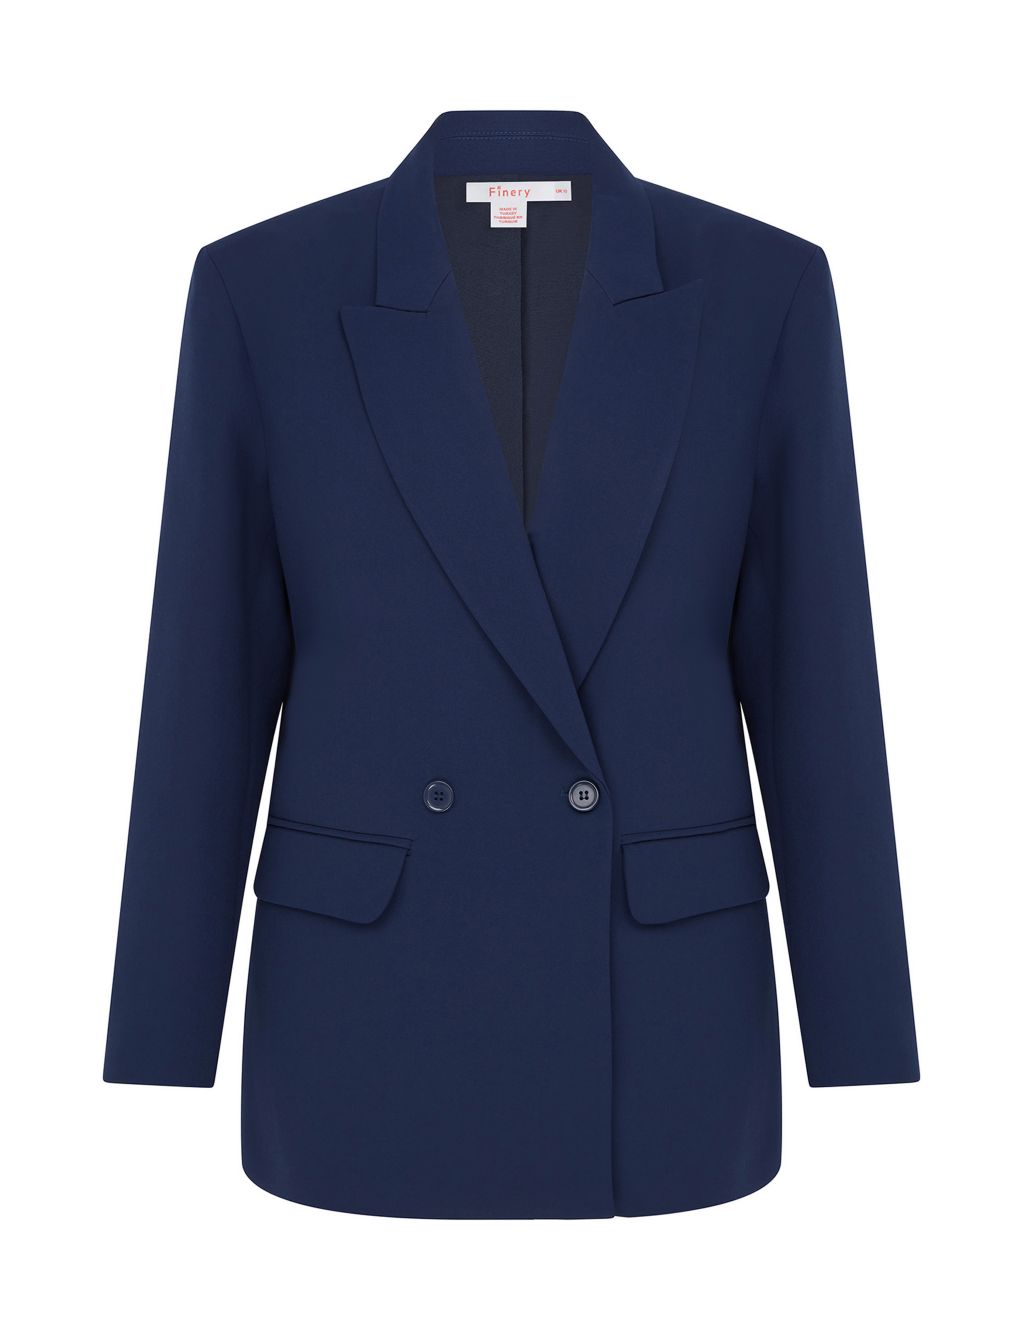 Double Breasted Blazer | Finery London | M&S